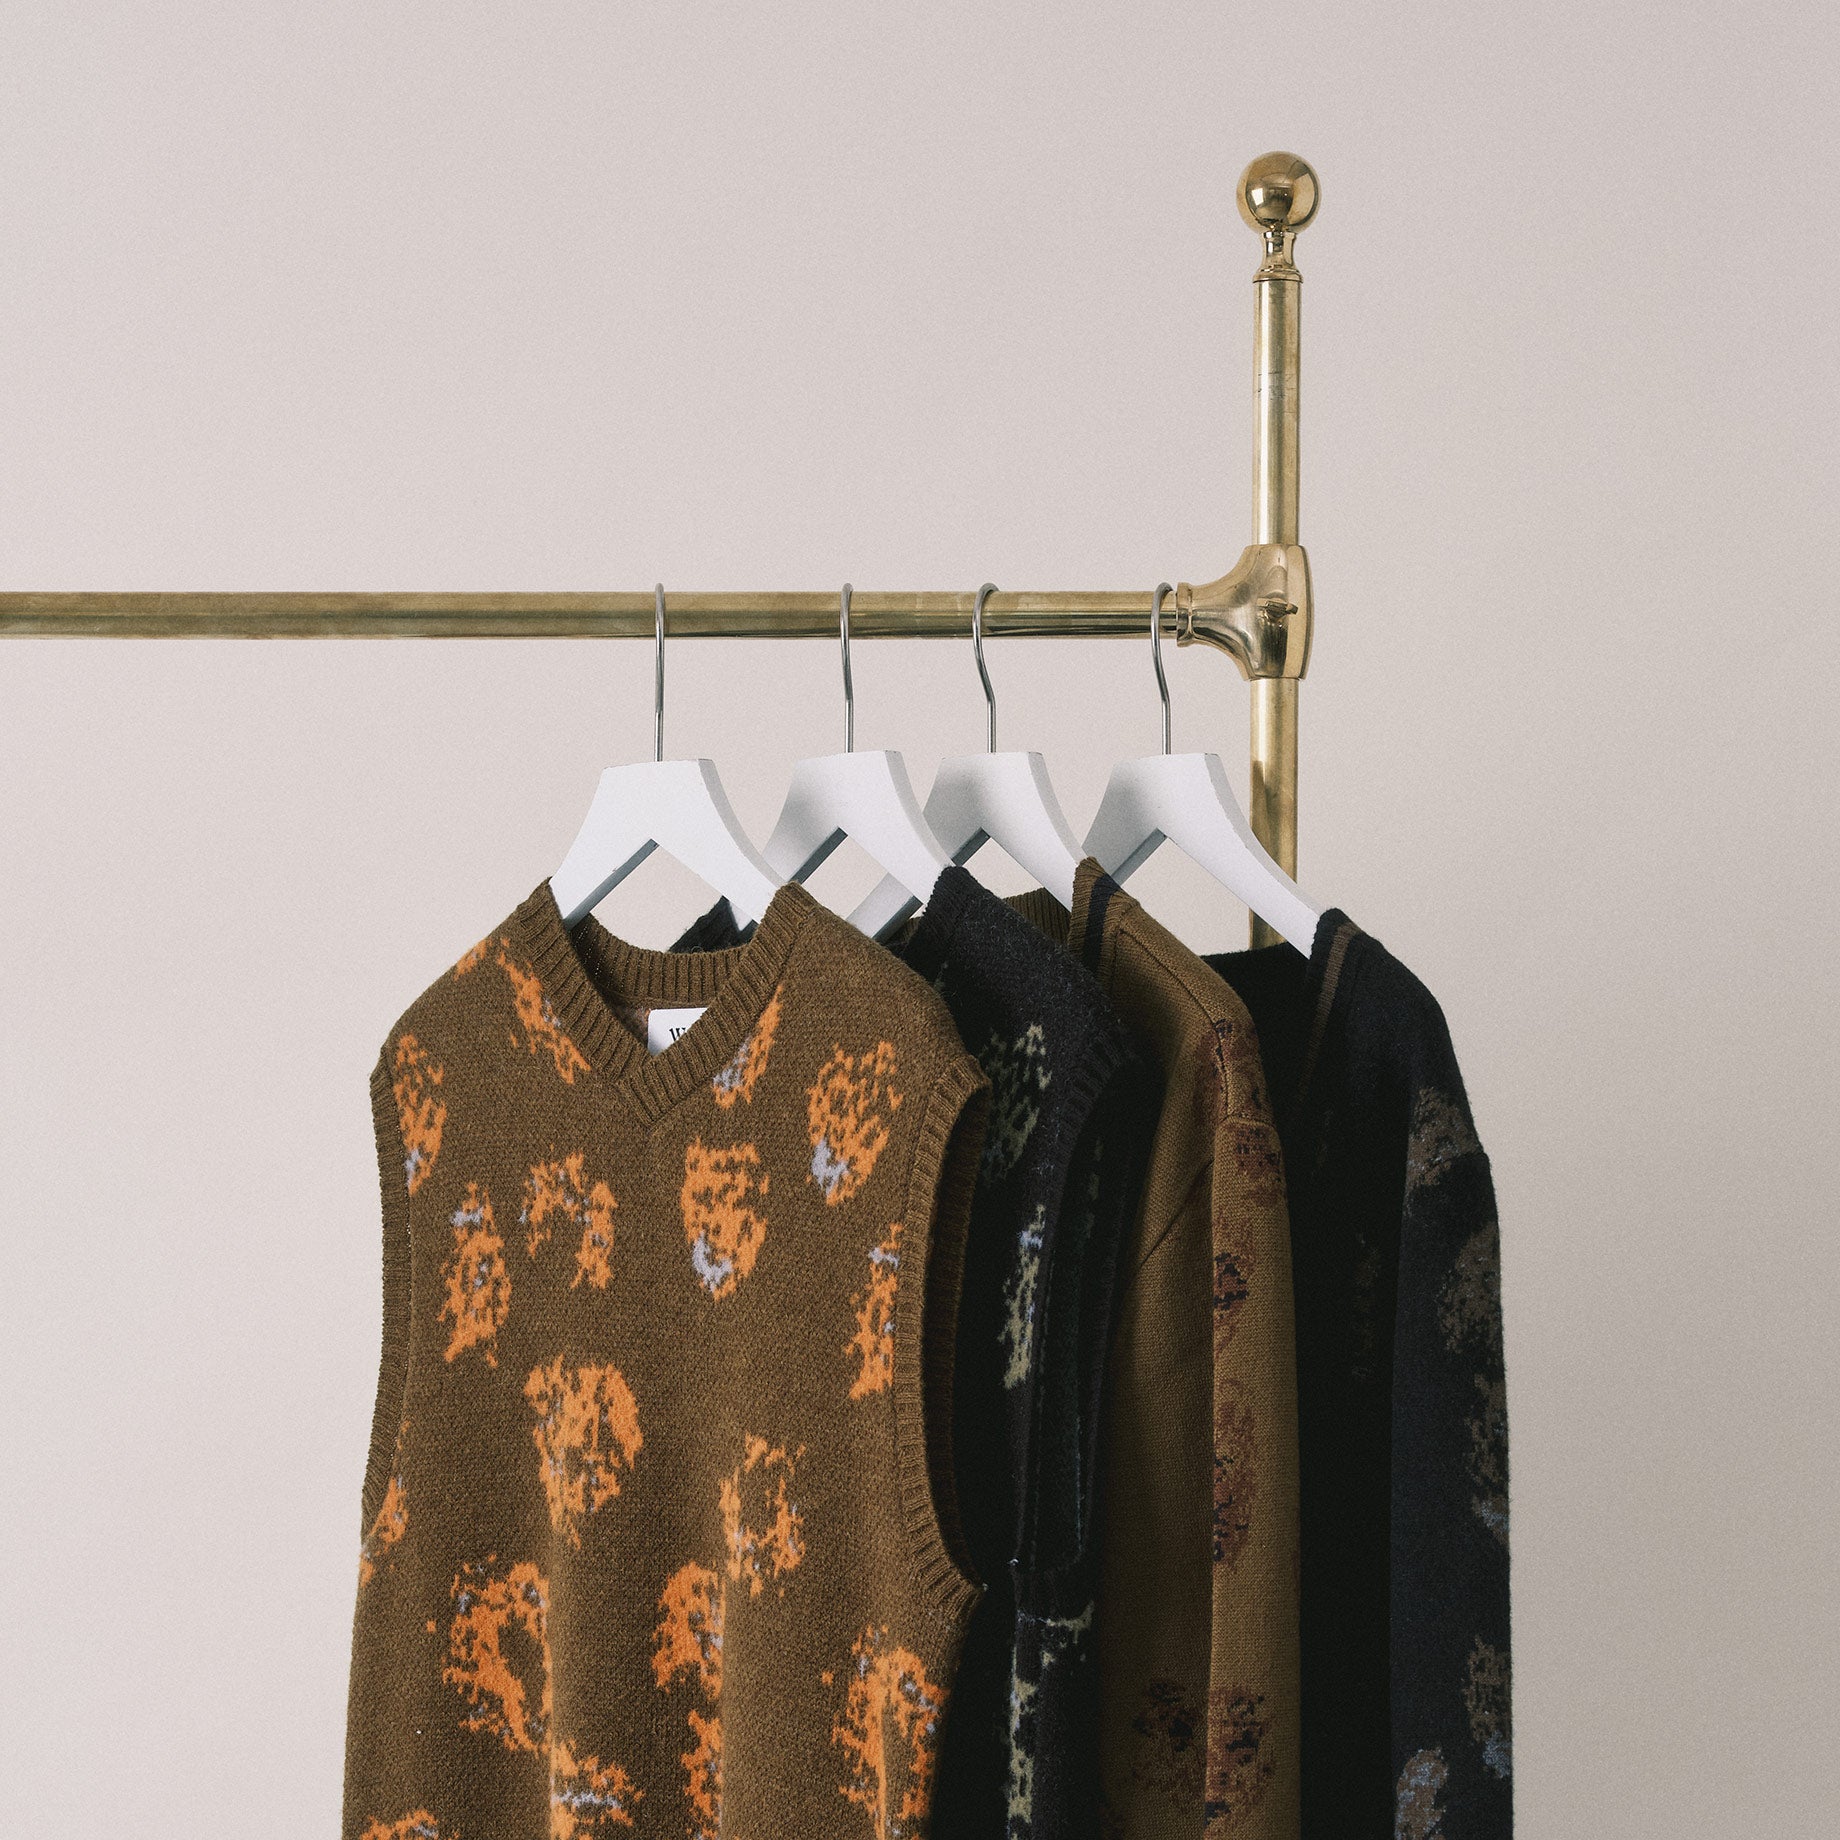 Patterned knitted Wax London clothing hanging on a brass rail